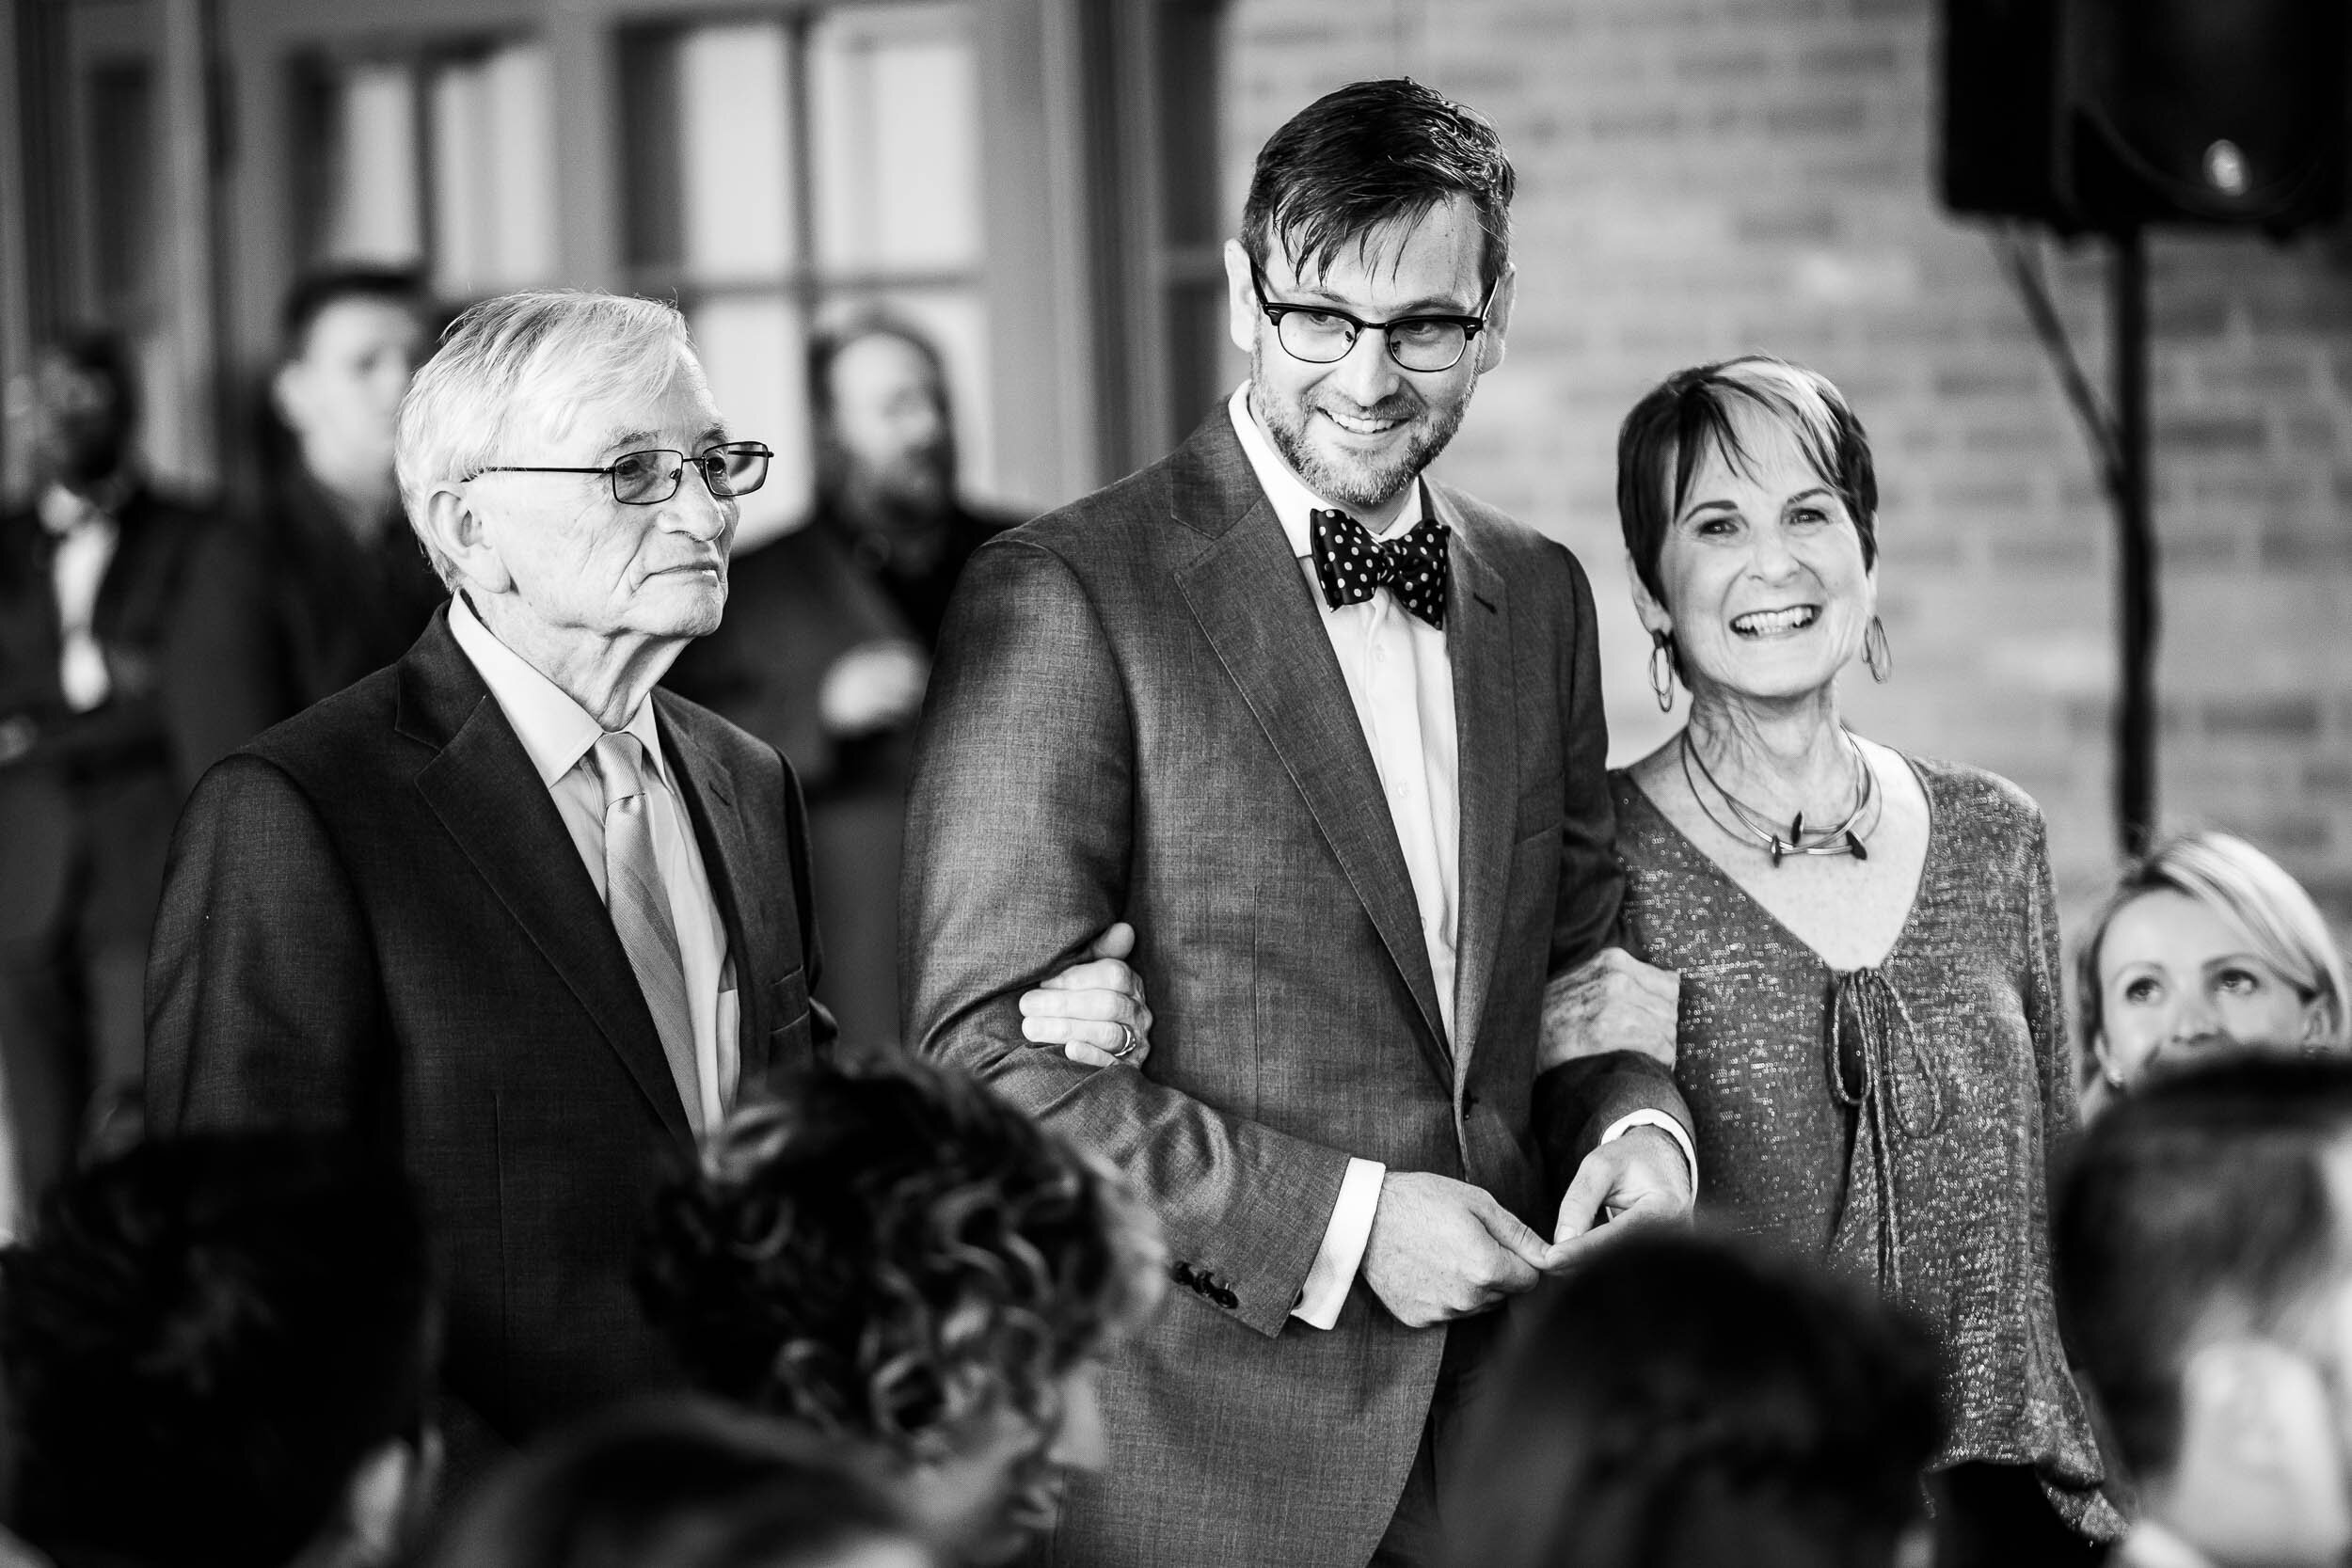 Groom walks down the aisle with his parents: Columbus Park Refectory Chicago wedding captured by J. Brown Photography.